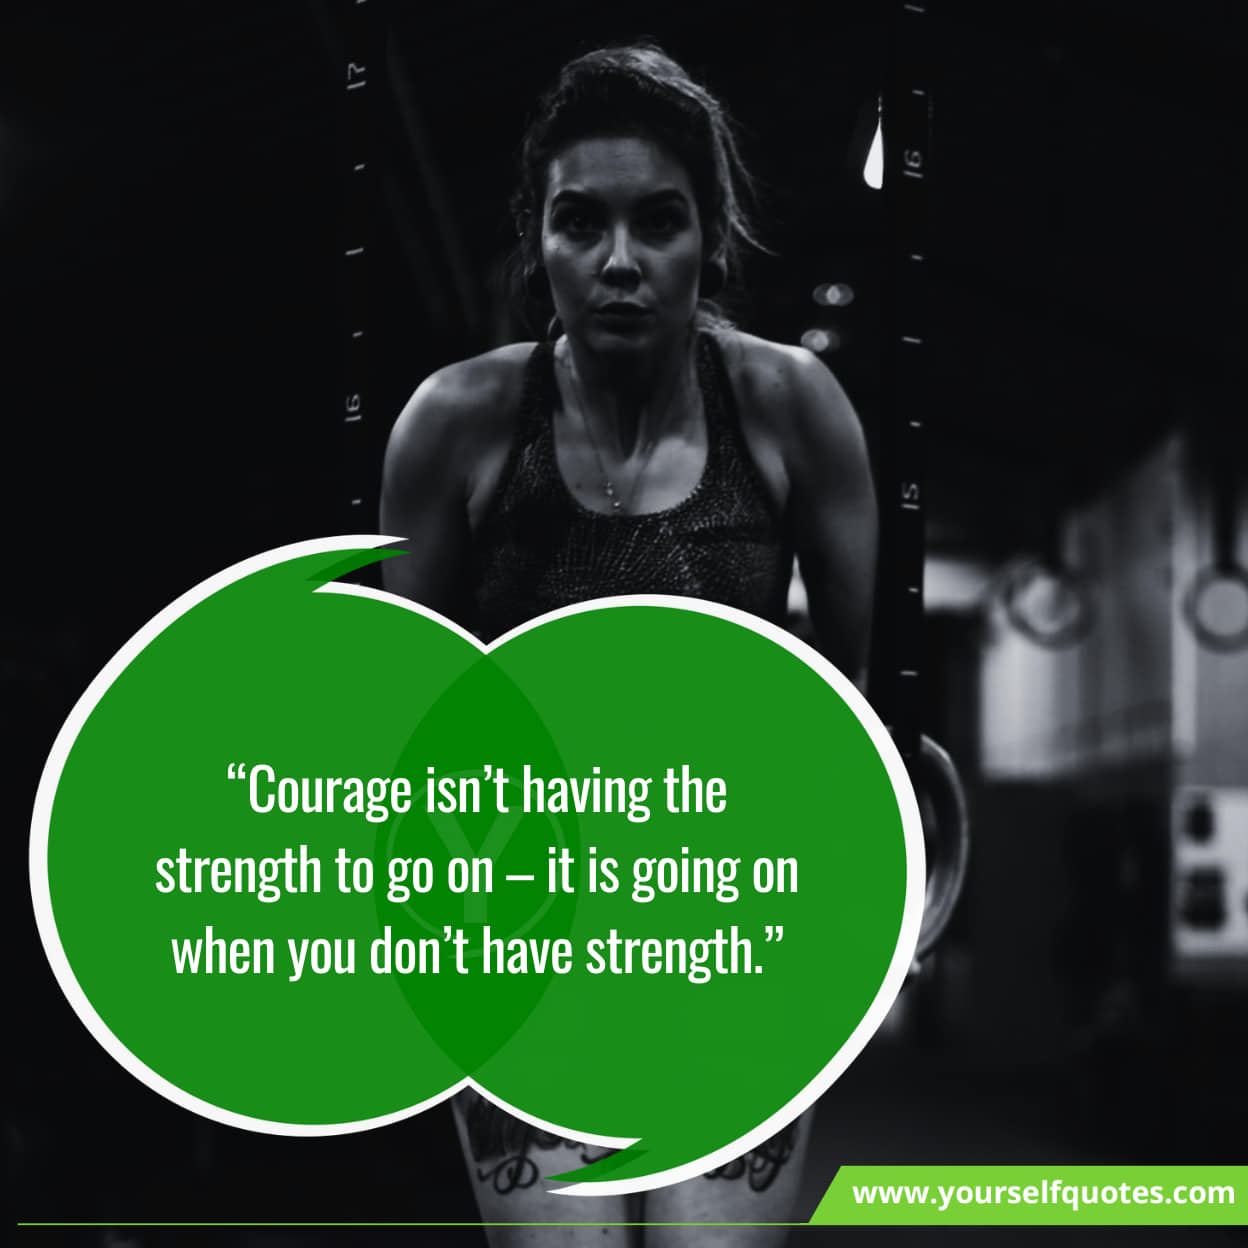 Inspirational Quotes For Being Strong